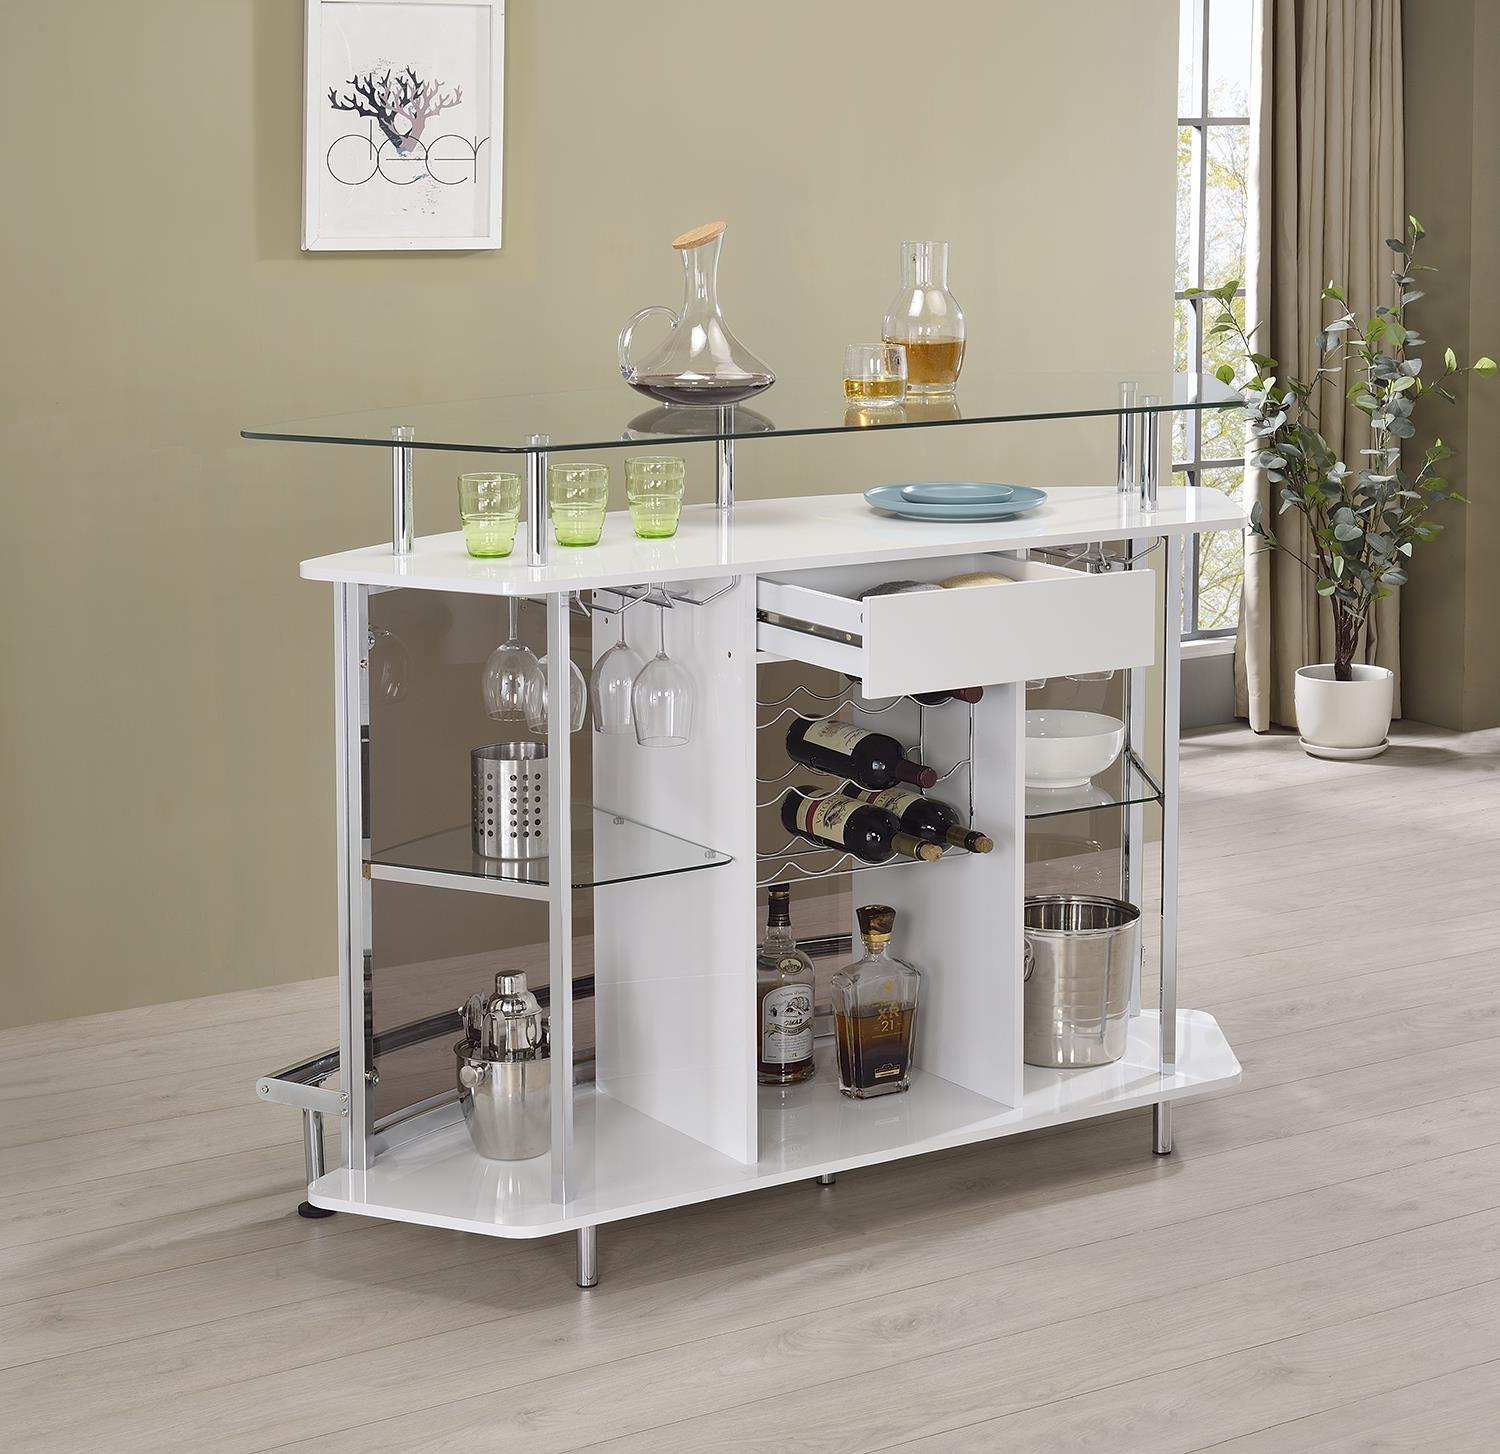 Crescent Shaped Glass Top Bar Unit with Drawer - What A Room